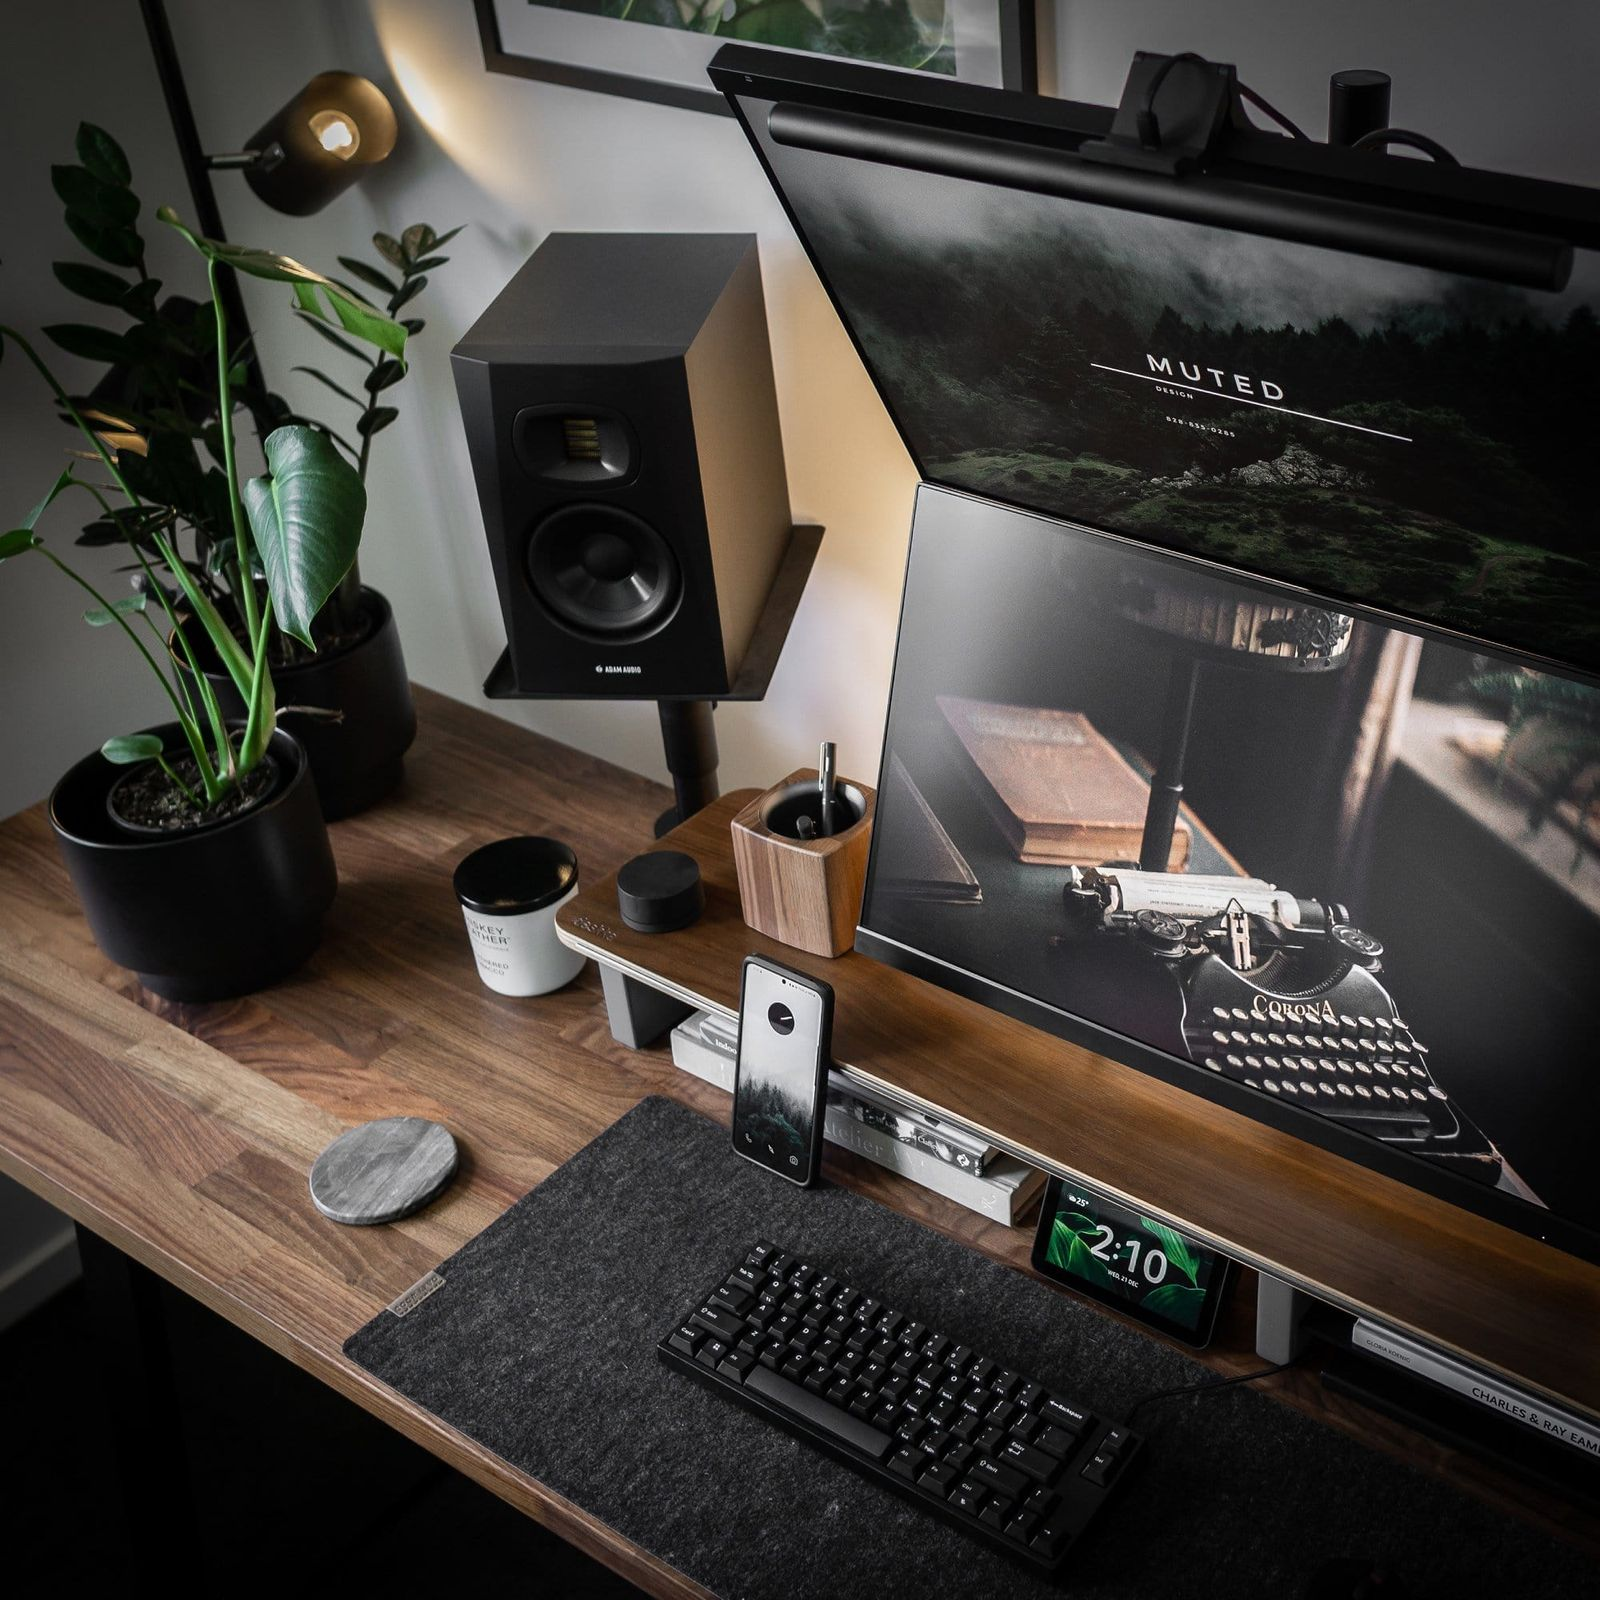 The moody workspace with vertically stacked monitors and two plants in dark pots